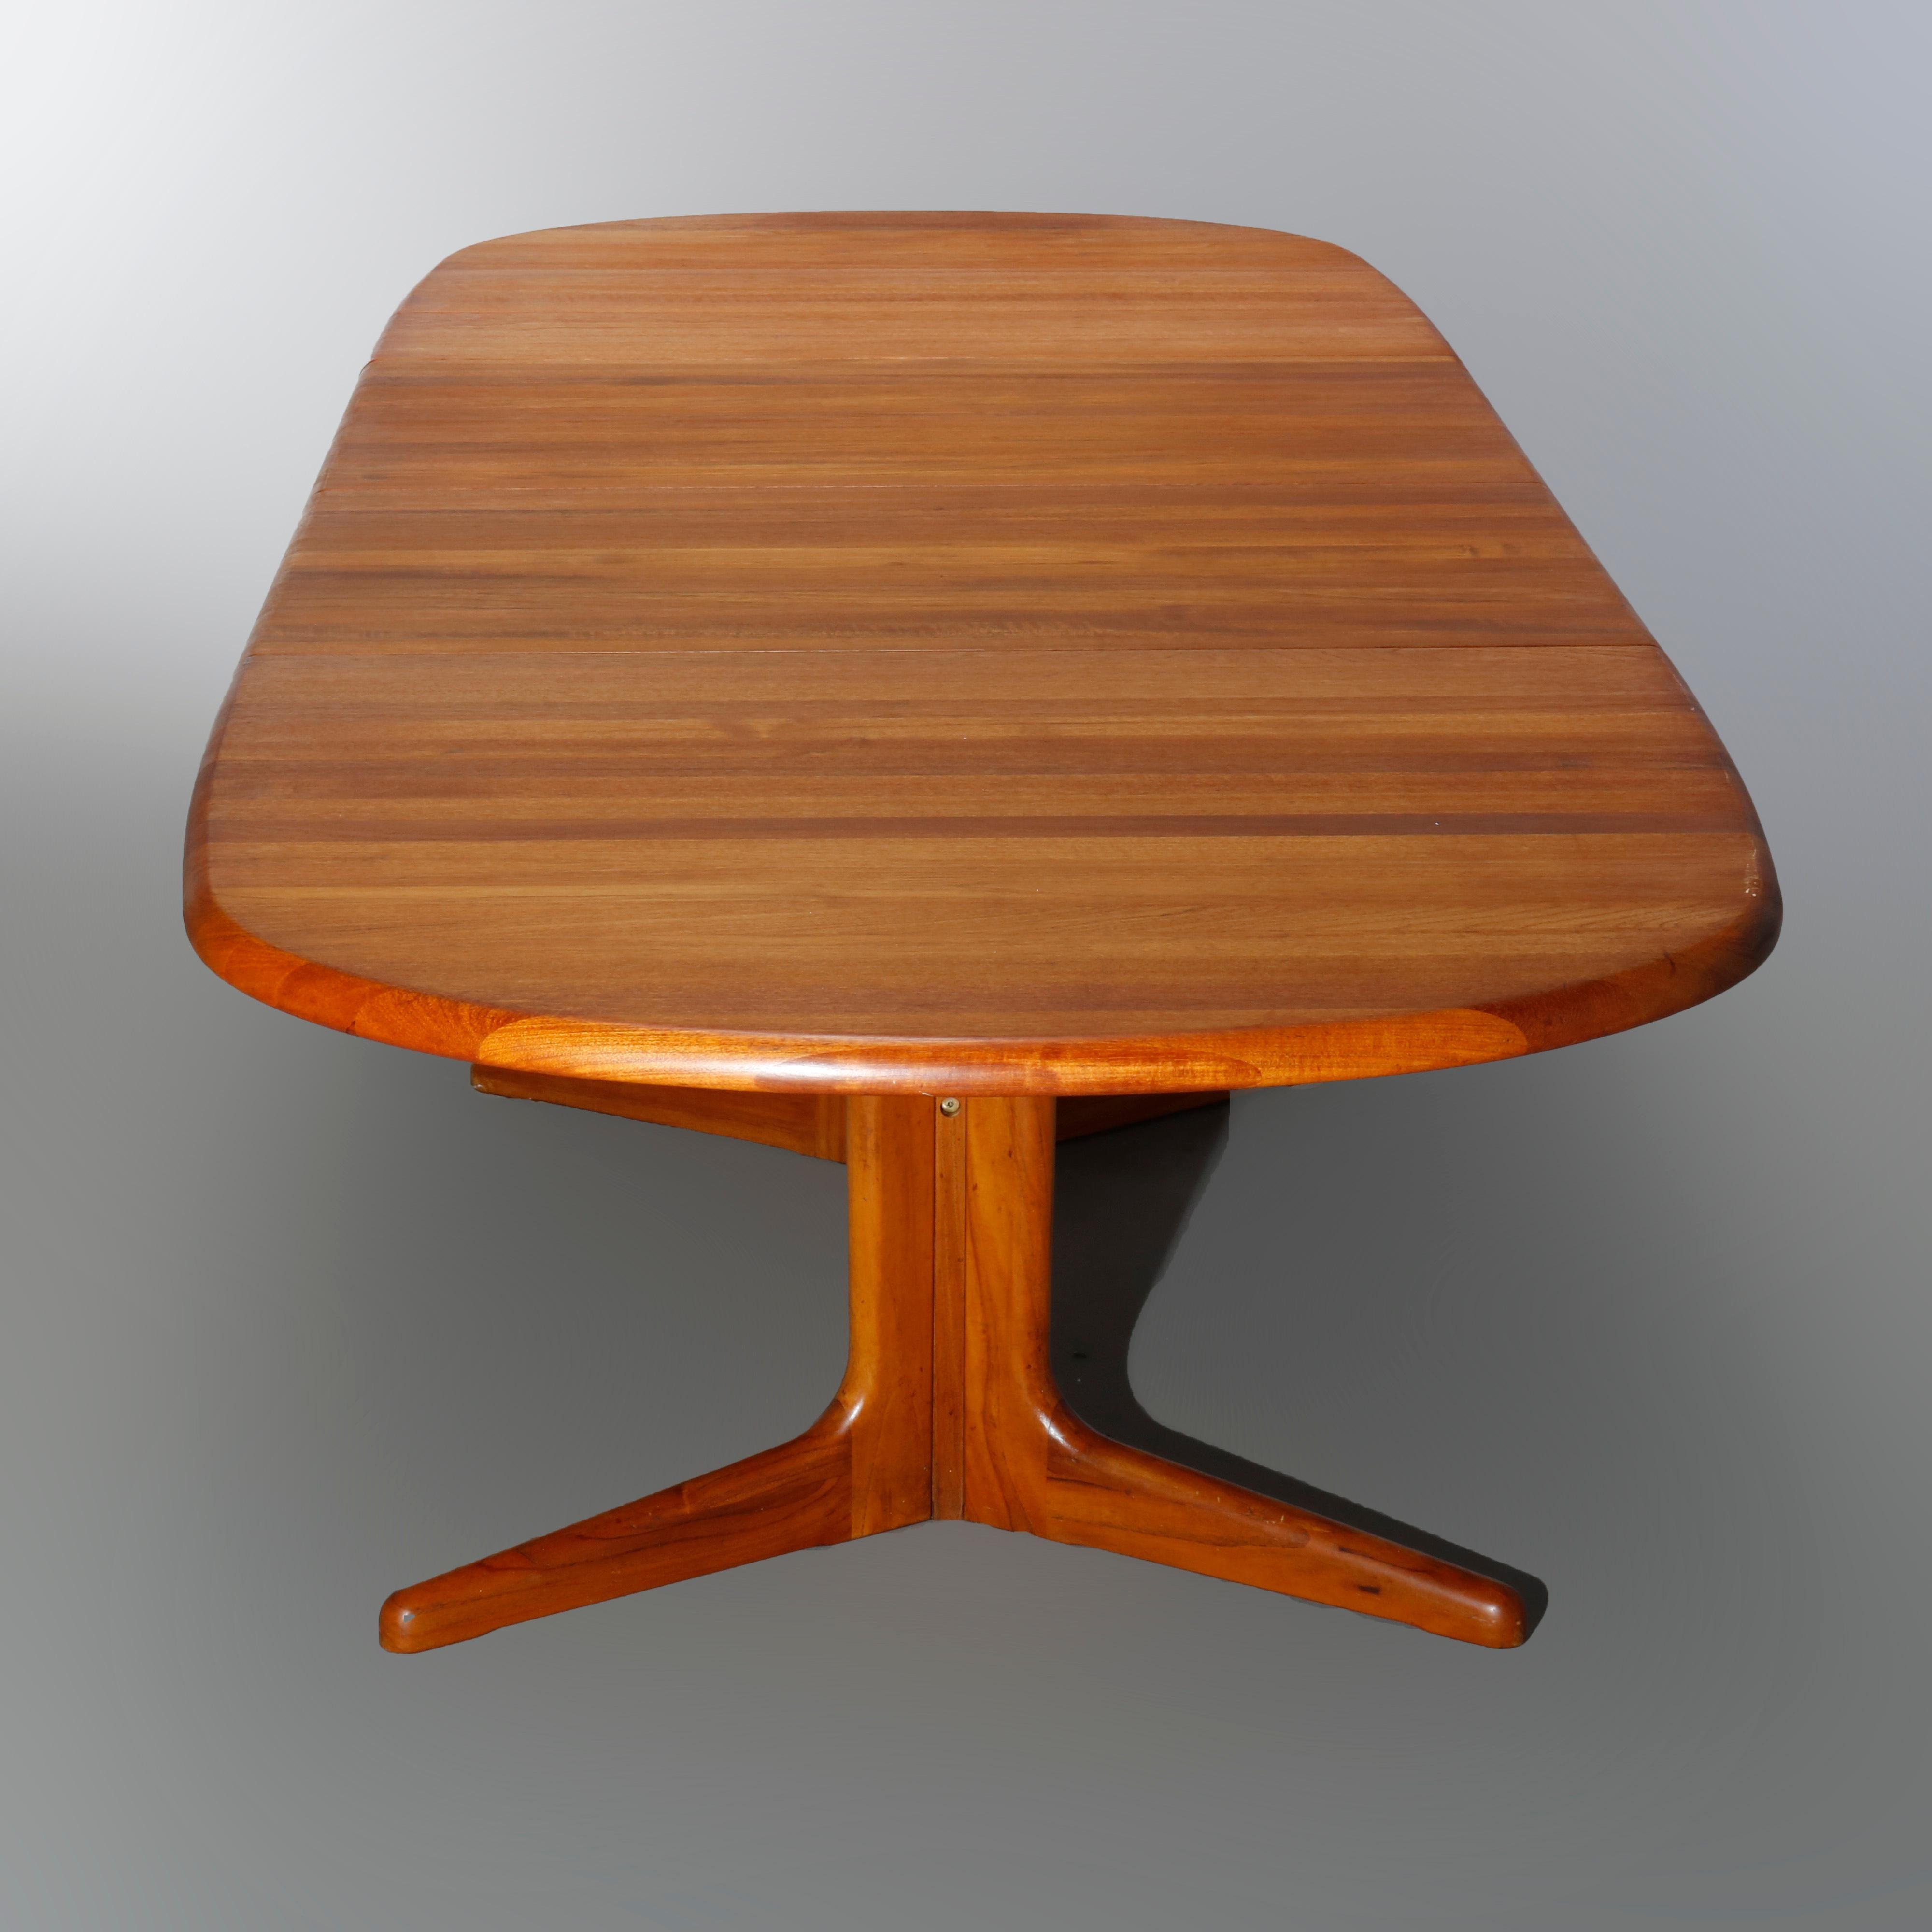 A Mid-Century Danish modern extension dining table offers teakwood construction in trestle form with v-form legs and having two 10